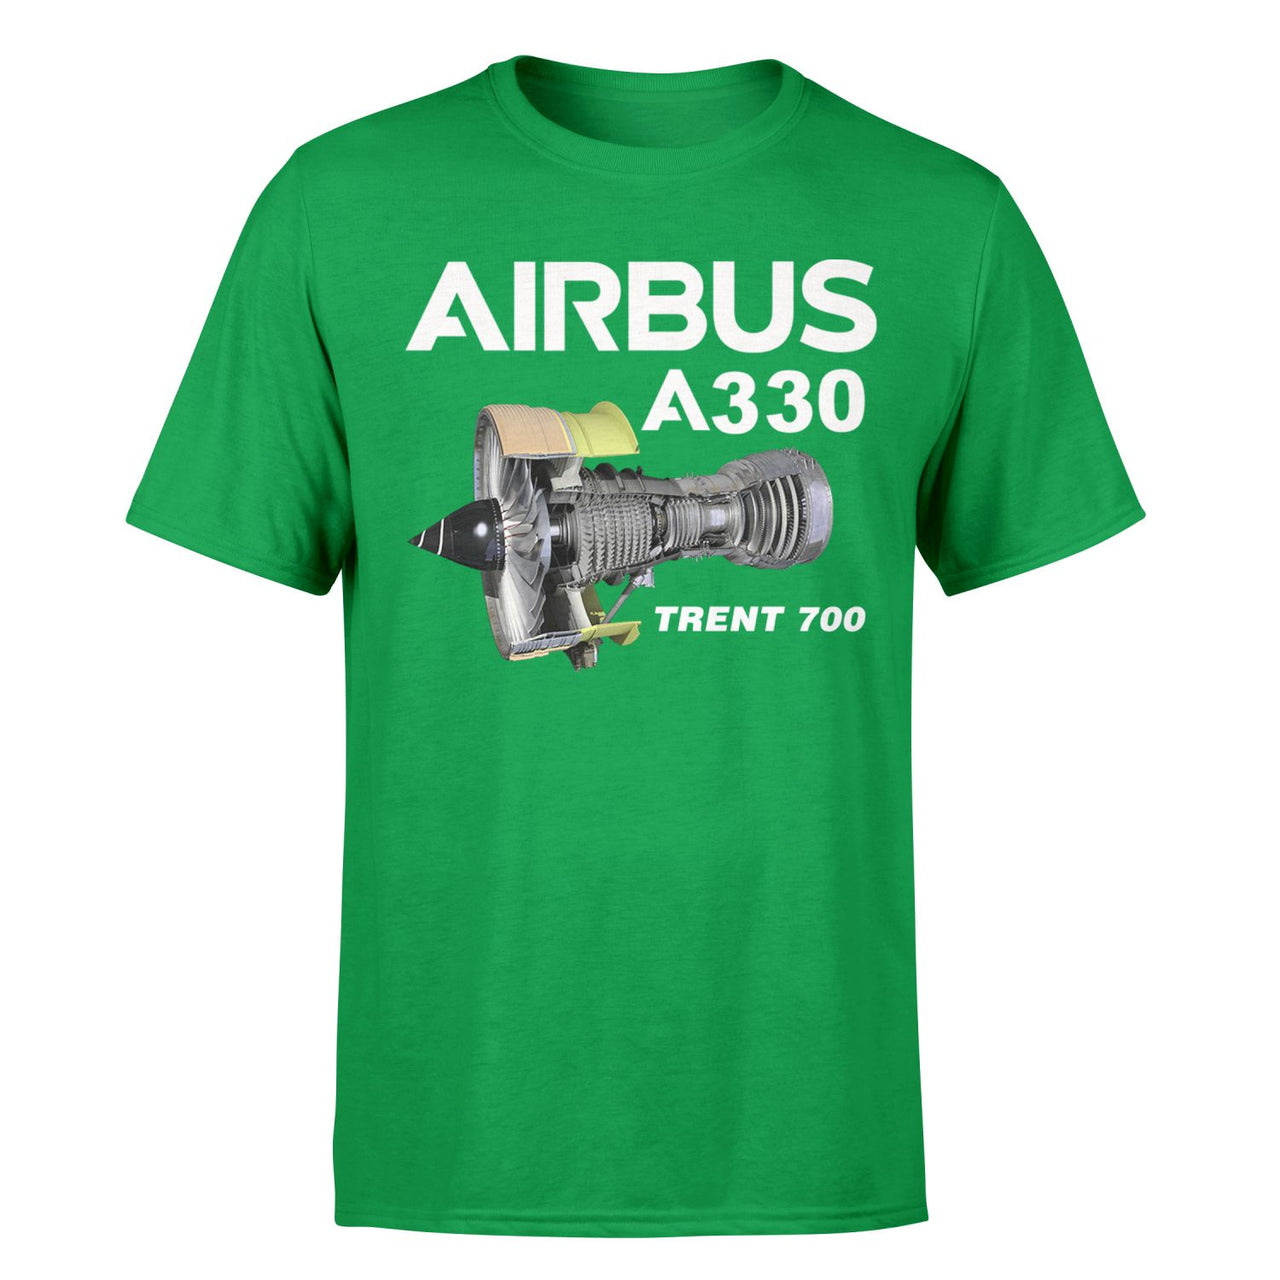 Airbus A330 & Trent 700 Engine Designed T-Shirts